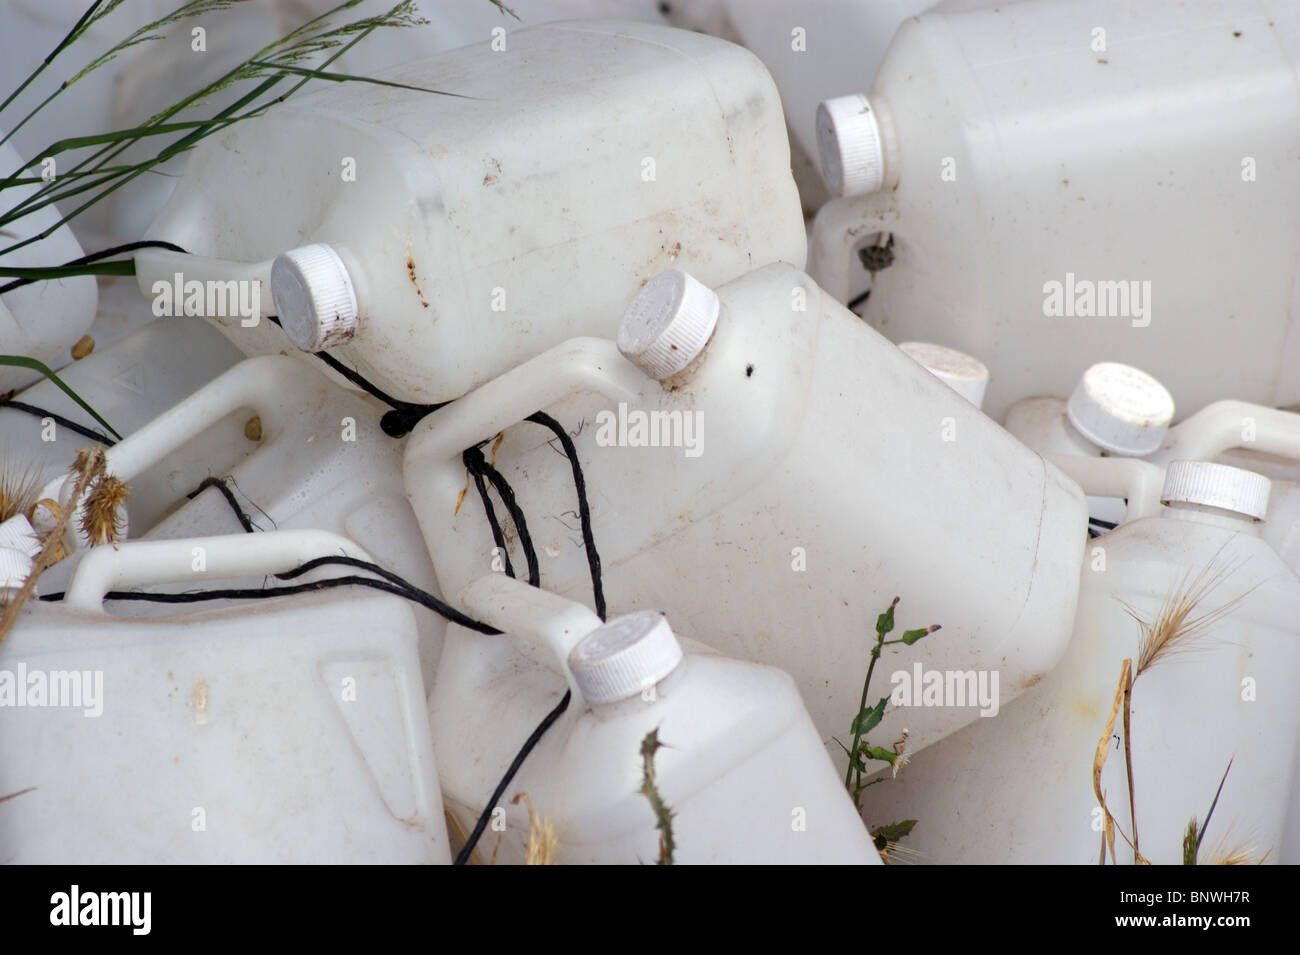 COLLECTION OF USED PLASTIC BOTTLES SCREW TOP CONTAINERS Stock Photo